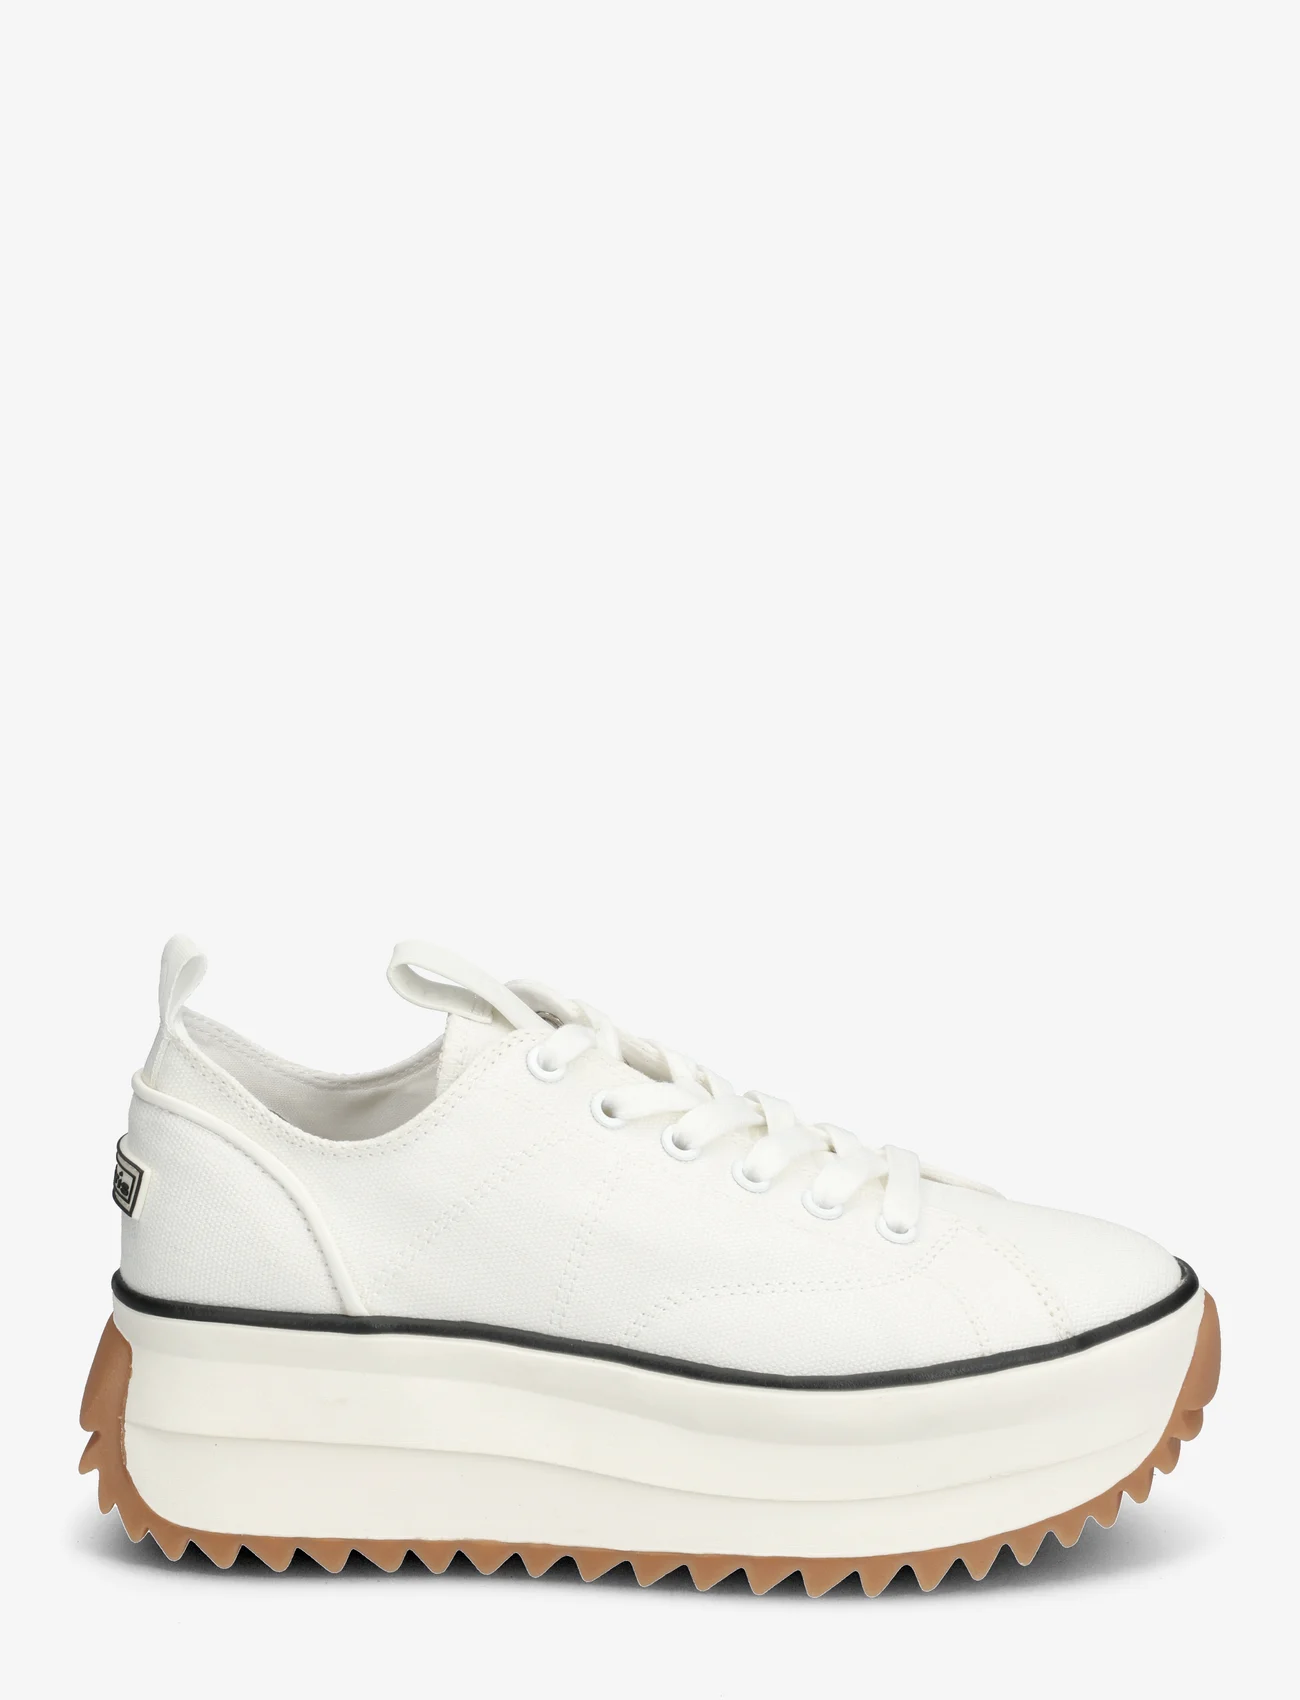 Tamaris - Women Lace-up - chunky sneakers - white - 1